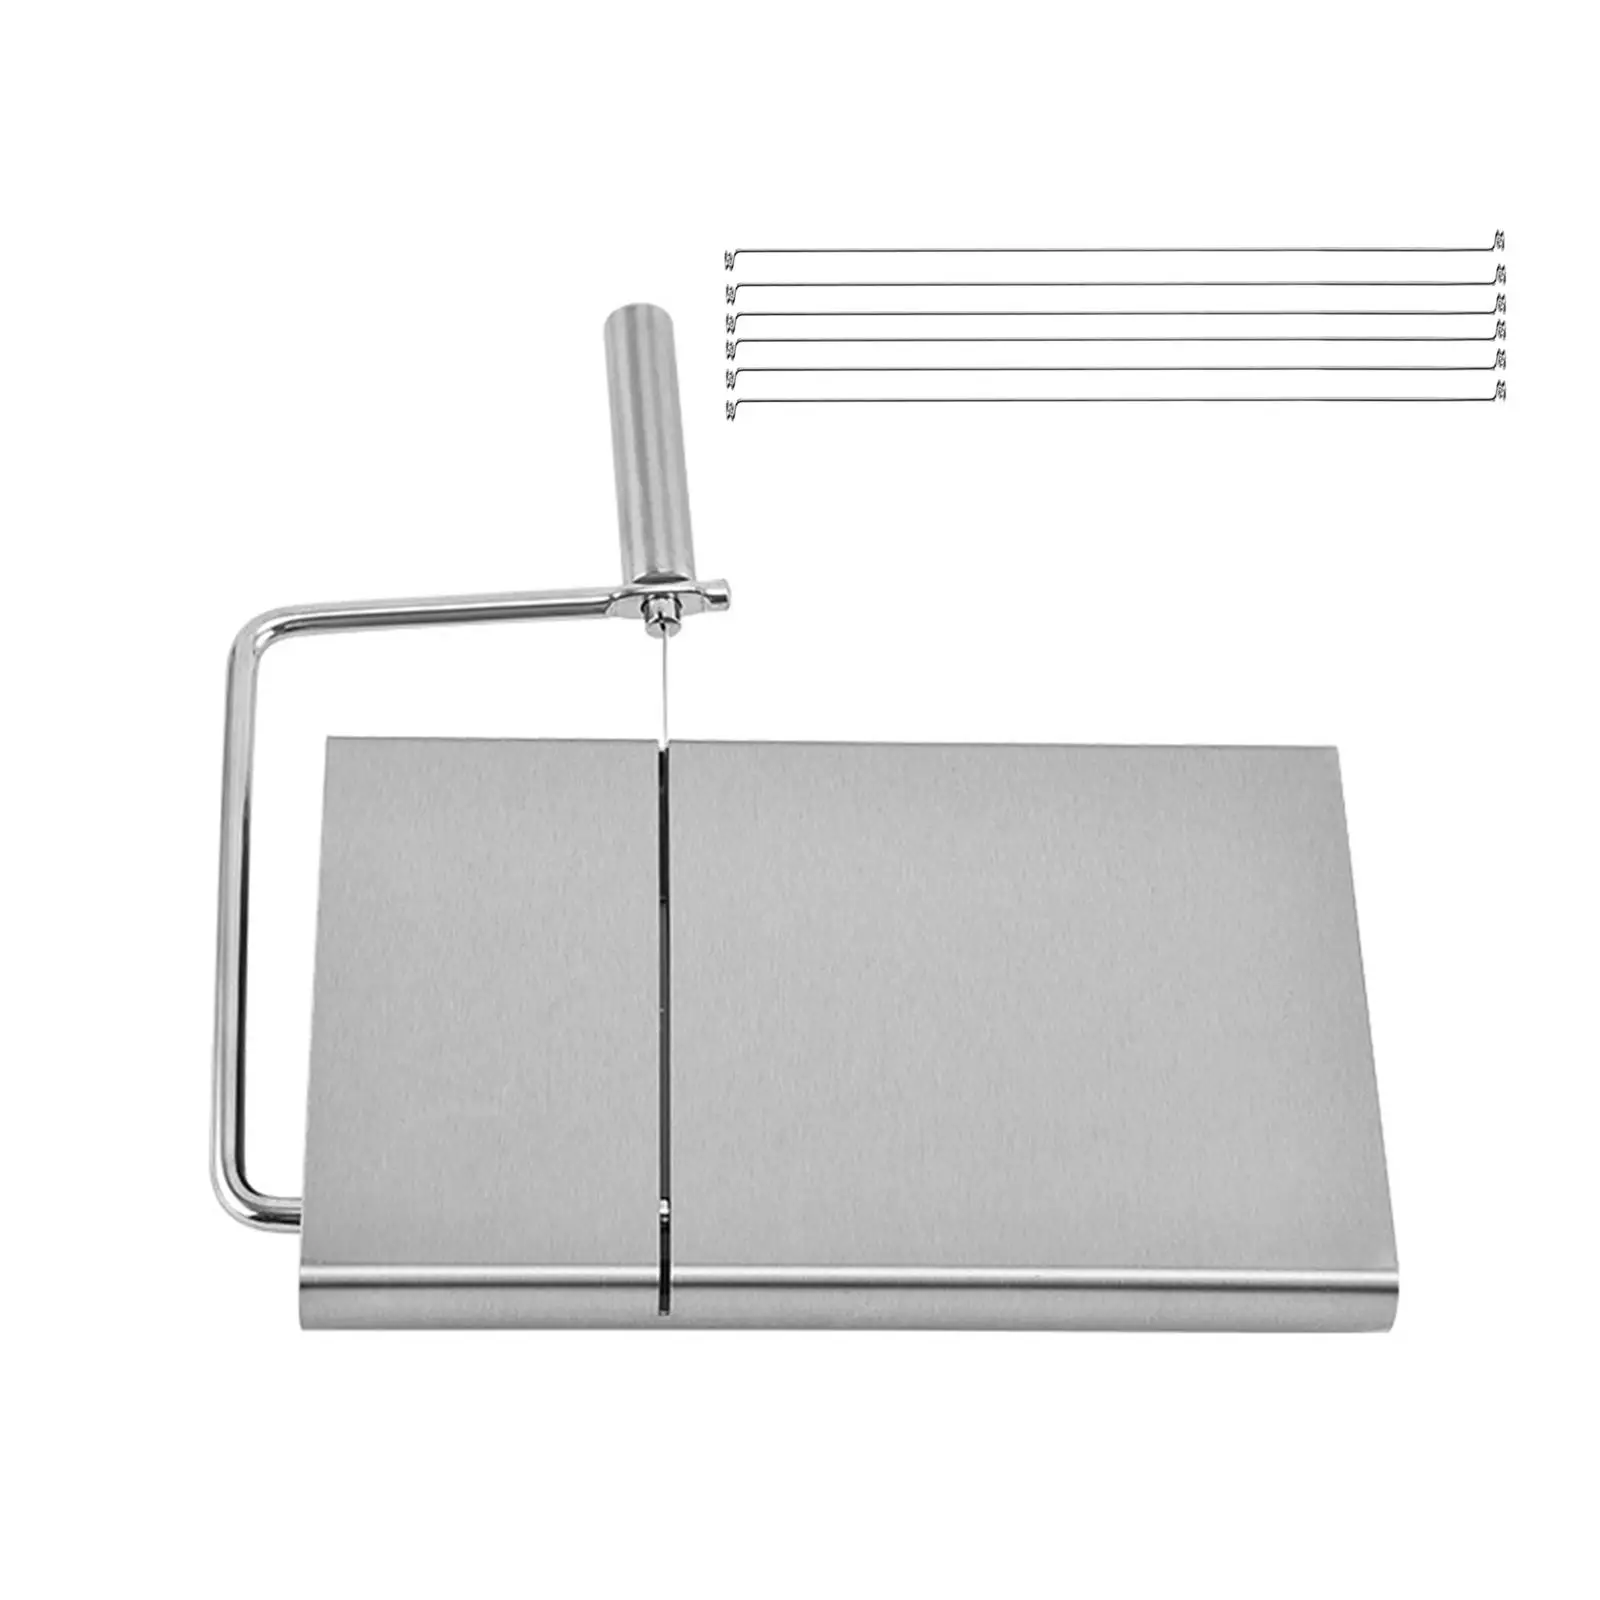 Cheese Cutter, Cheese Block , Kitchen Accessories Cake Blade Heavy Duty Stainless Steel Cheese , Cheese Cutting Board, for Cafe